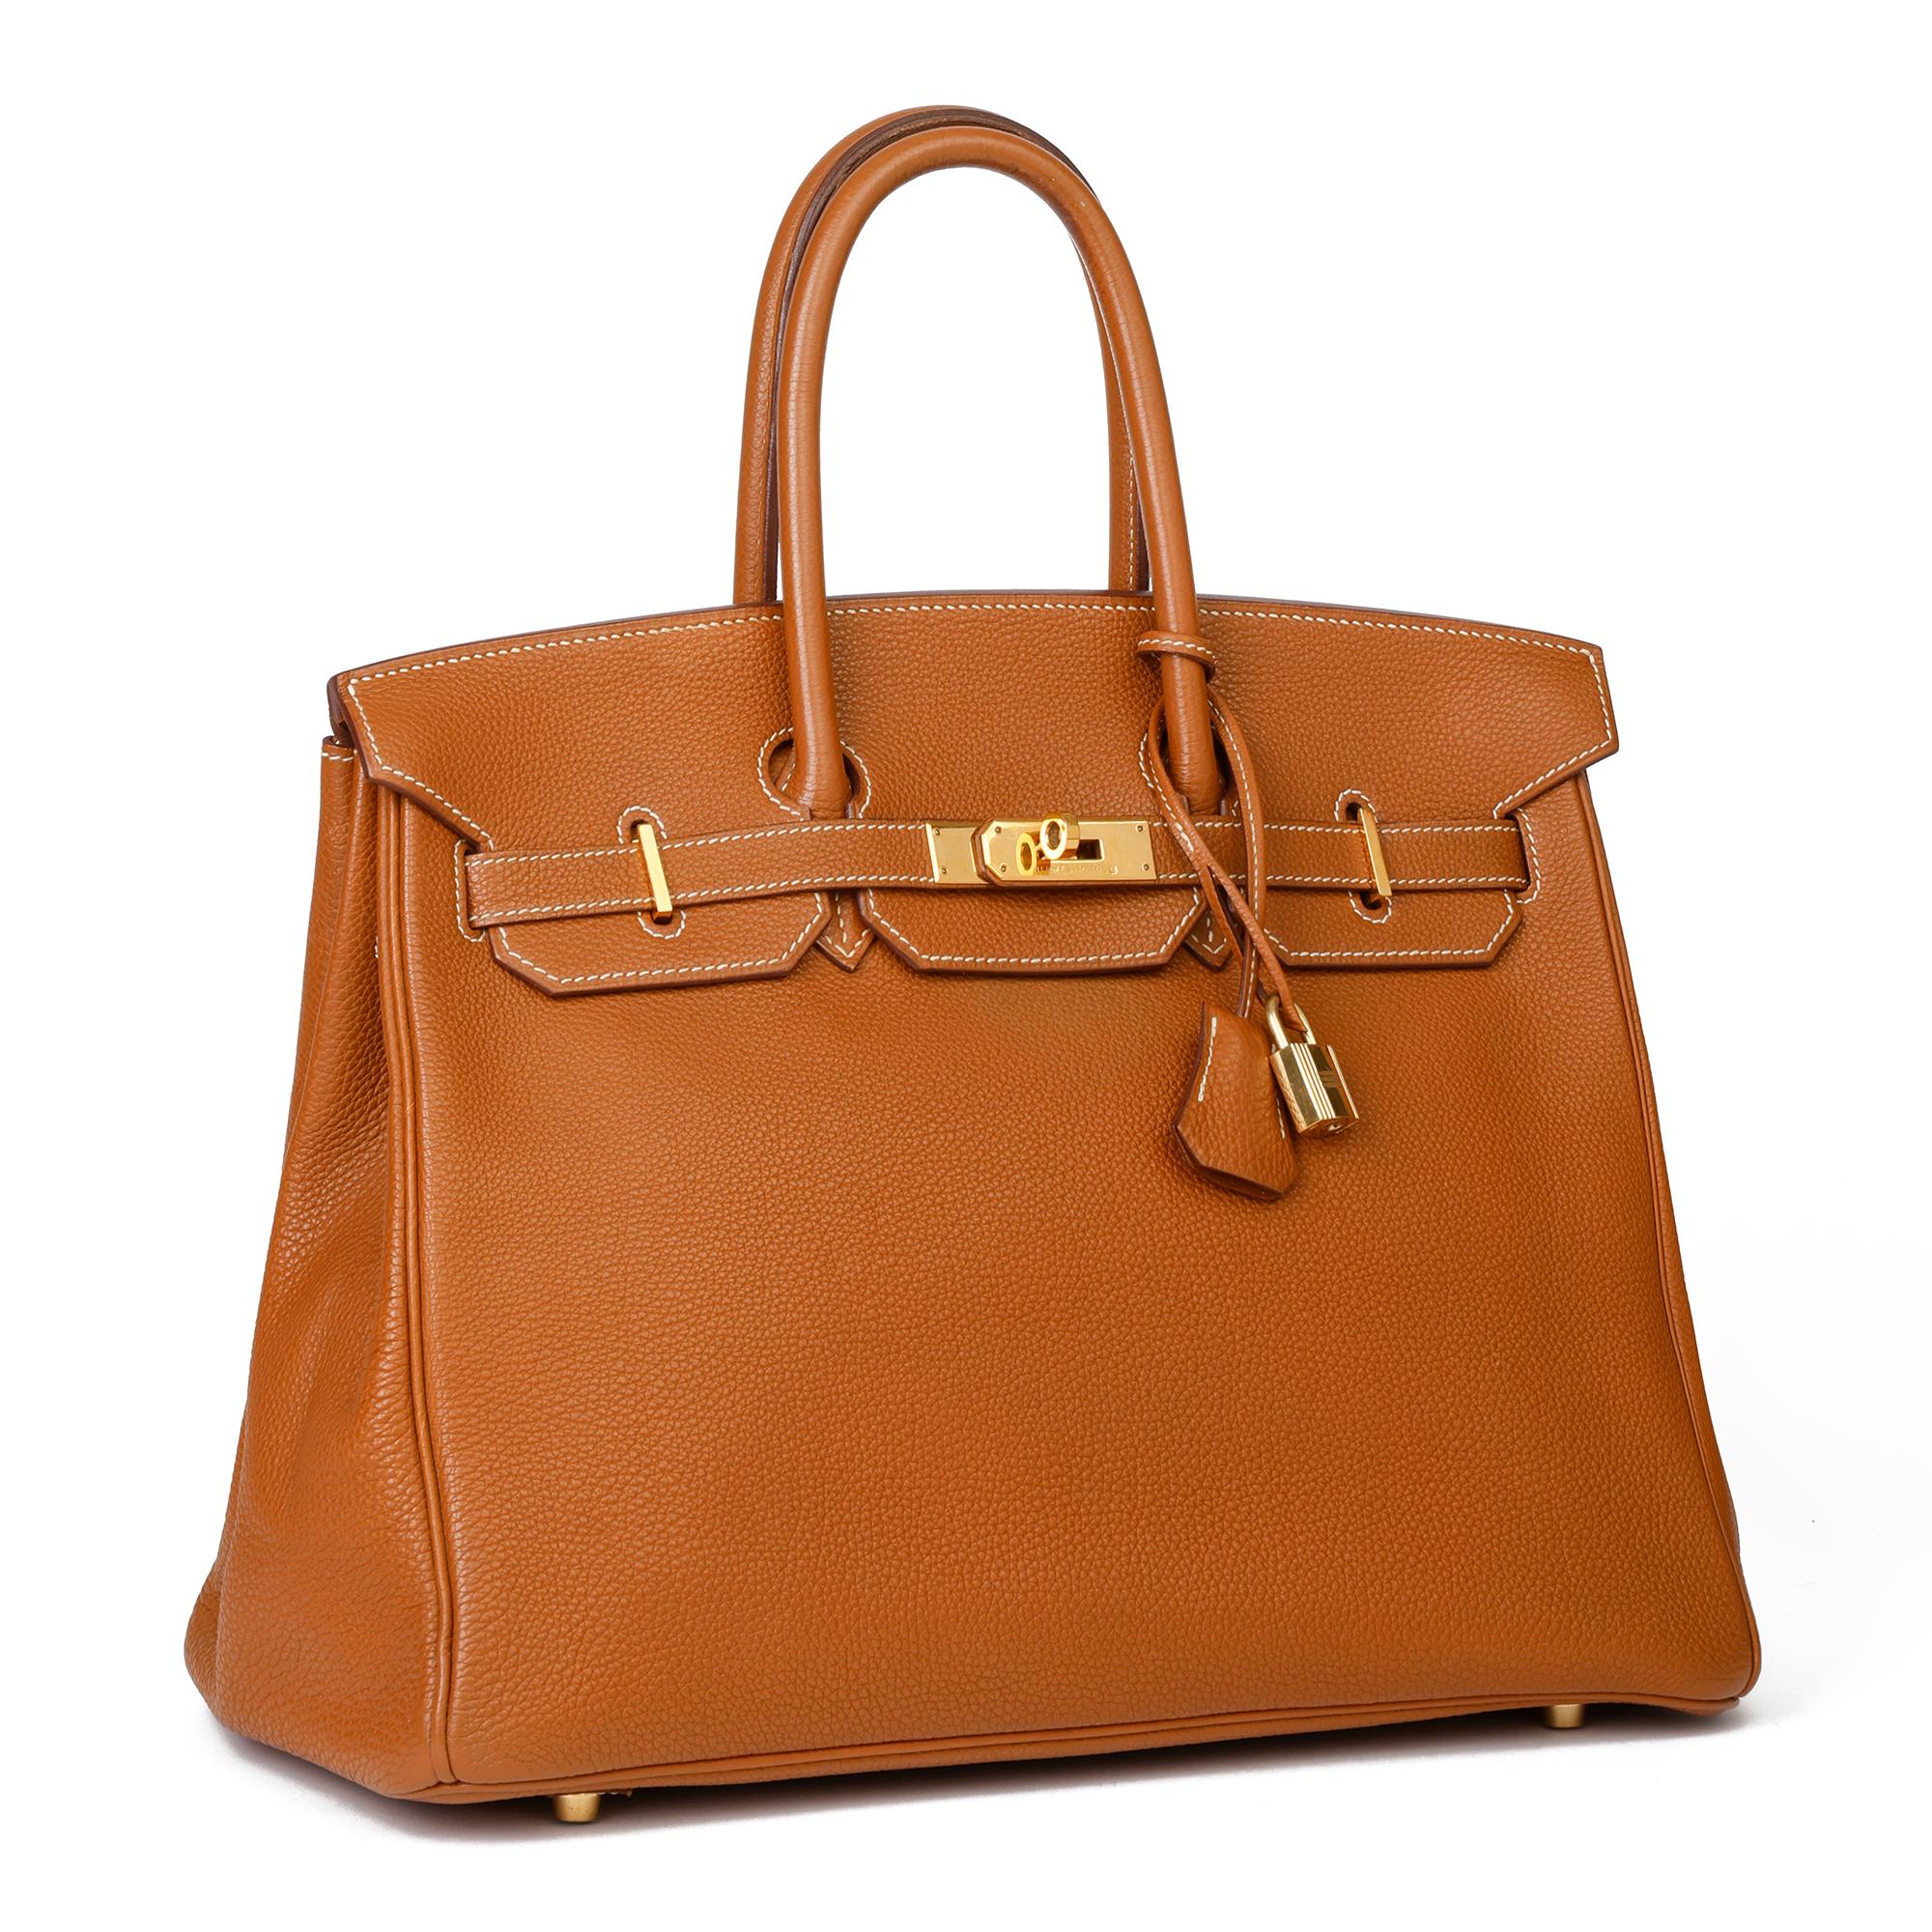 HERMÈS
Gold Togo Leather Birkin 35cm

Xupes Reference: CB289
Serial Number: [G]
Age (Circa): 2003
Accompanied By: Hermès Dust Bag, Lock, Keys, Clochette
Authenticity Details: Date Stamp (Made in France) 
Gender: Ladies
Type: Tote

Colour: